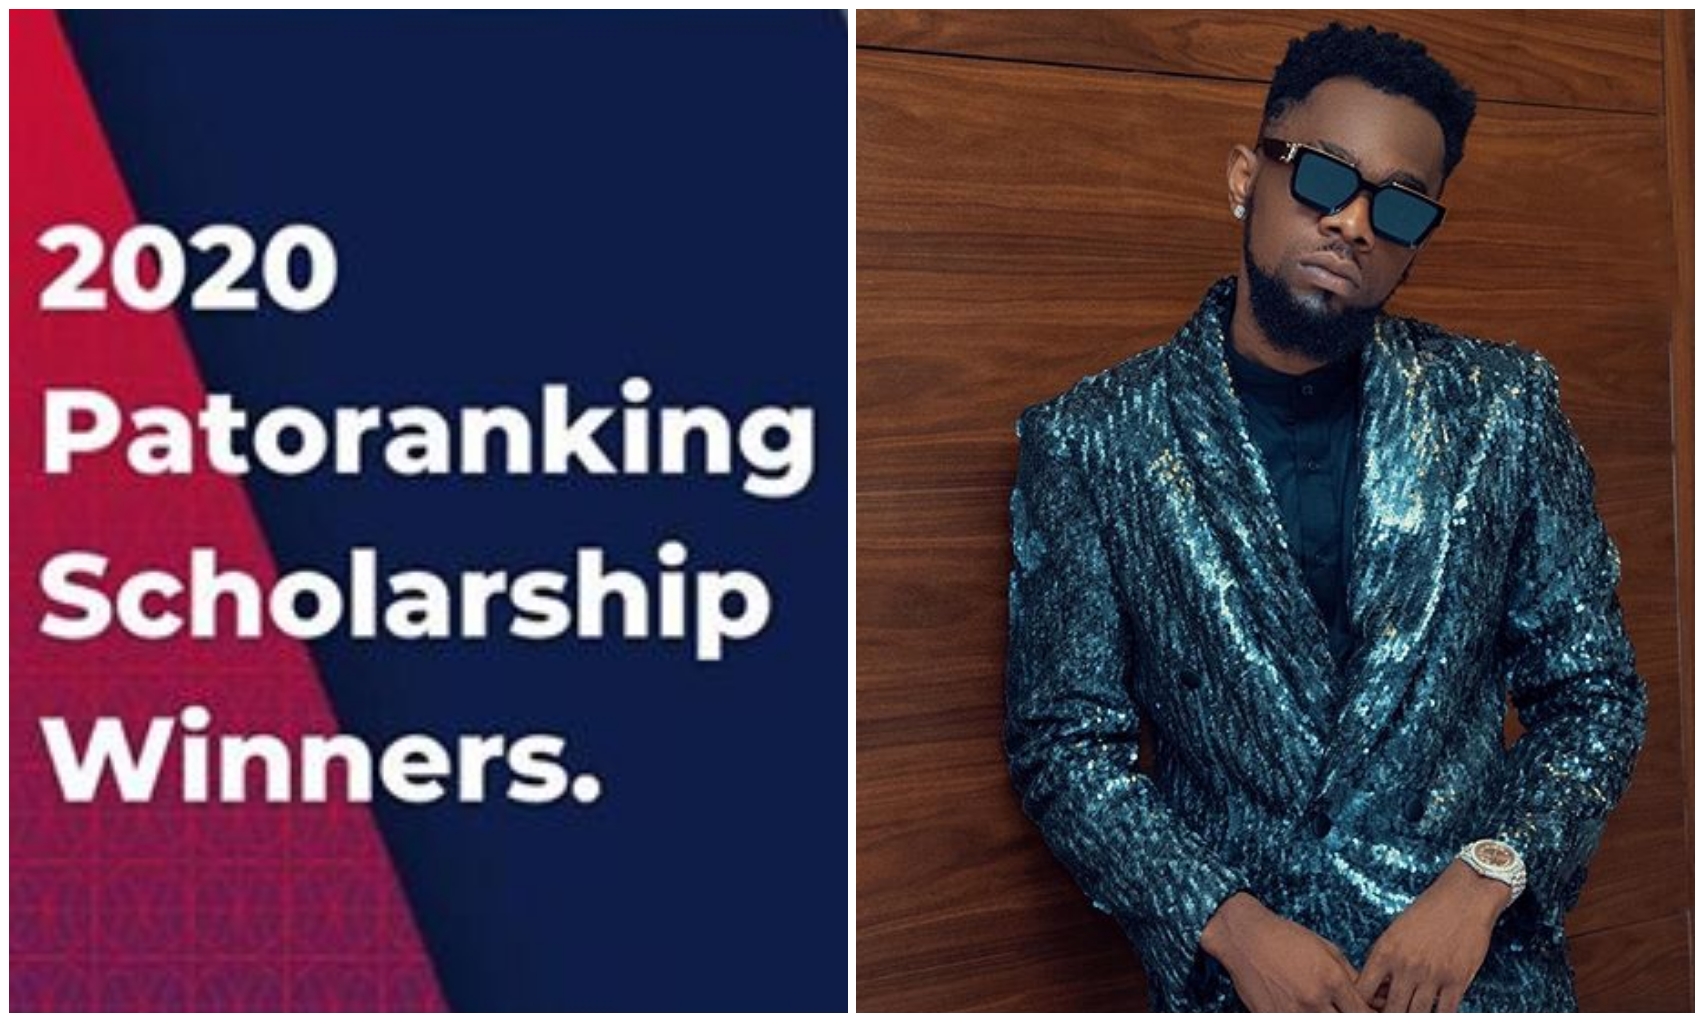 Patoranking awards full scholarship to 10 Young African Students